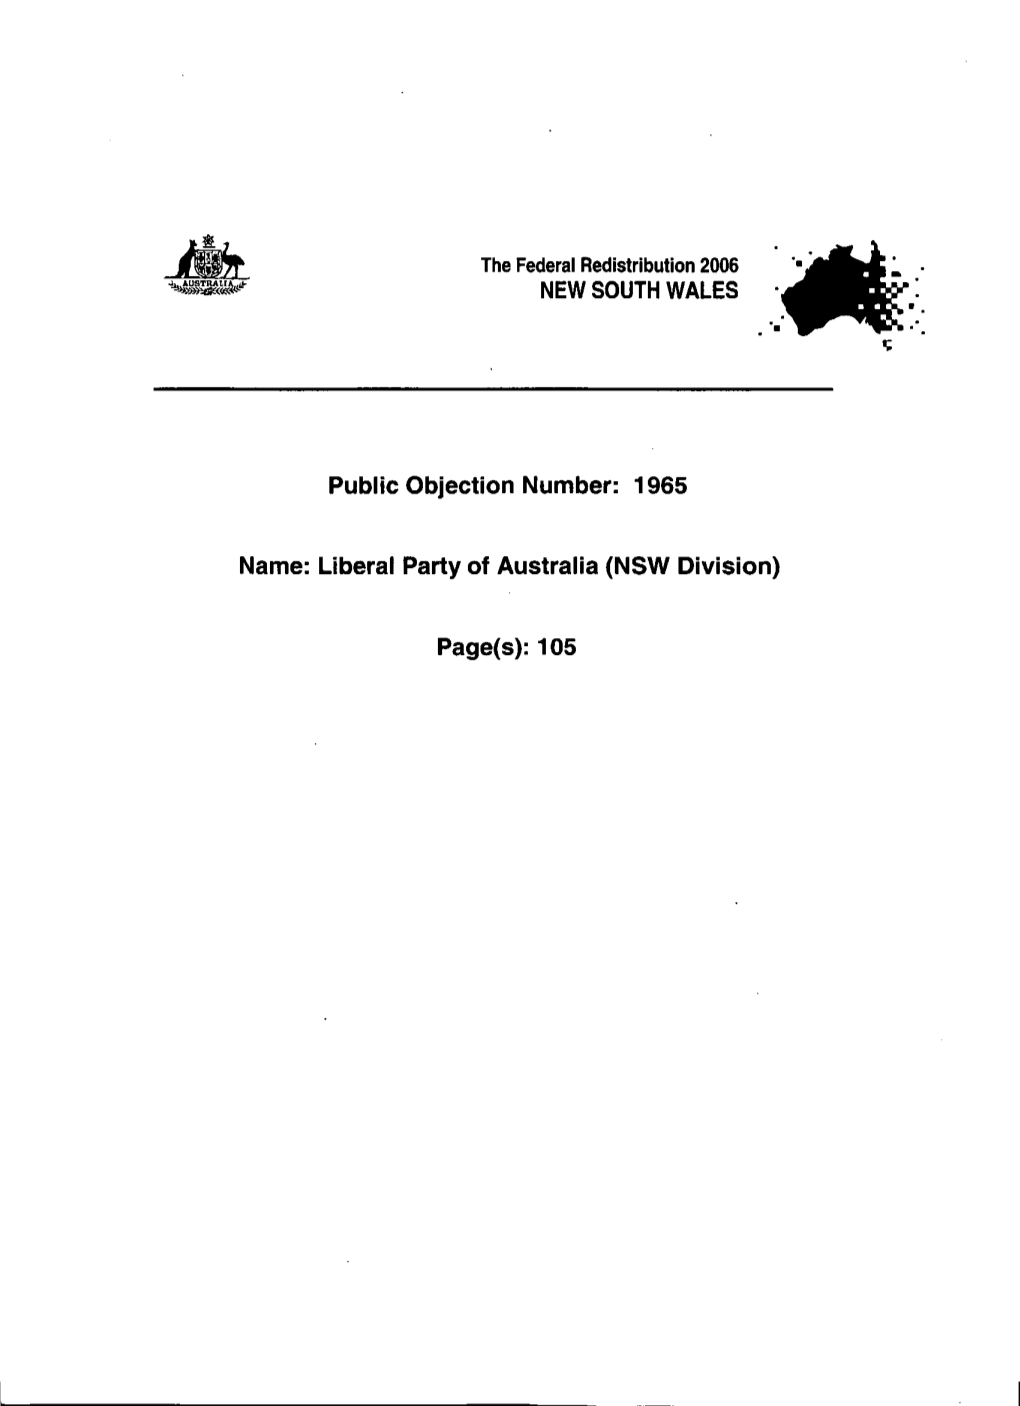 Liberal Party of Australia, New South Wales Division Objection to Proposed Redistribution